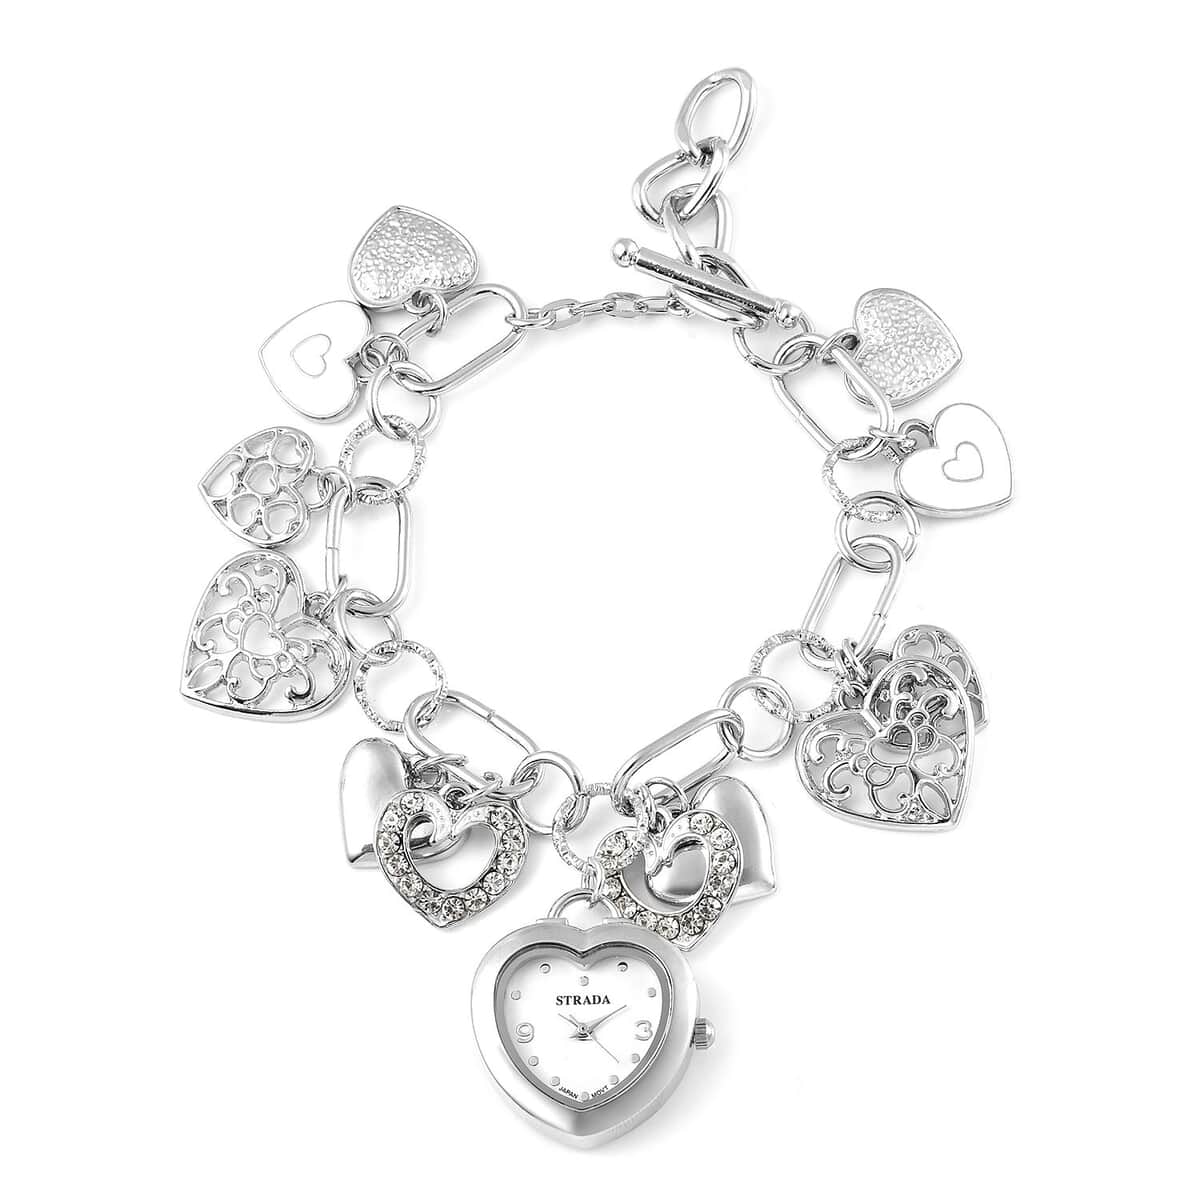 Strada White Austrian Crystal and Enameled Japanese Movement Charm Heart Bracelet Watch in Silvertone (7.5-9 in) image number 0